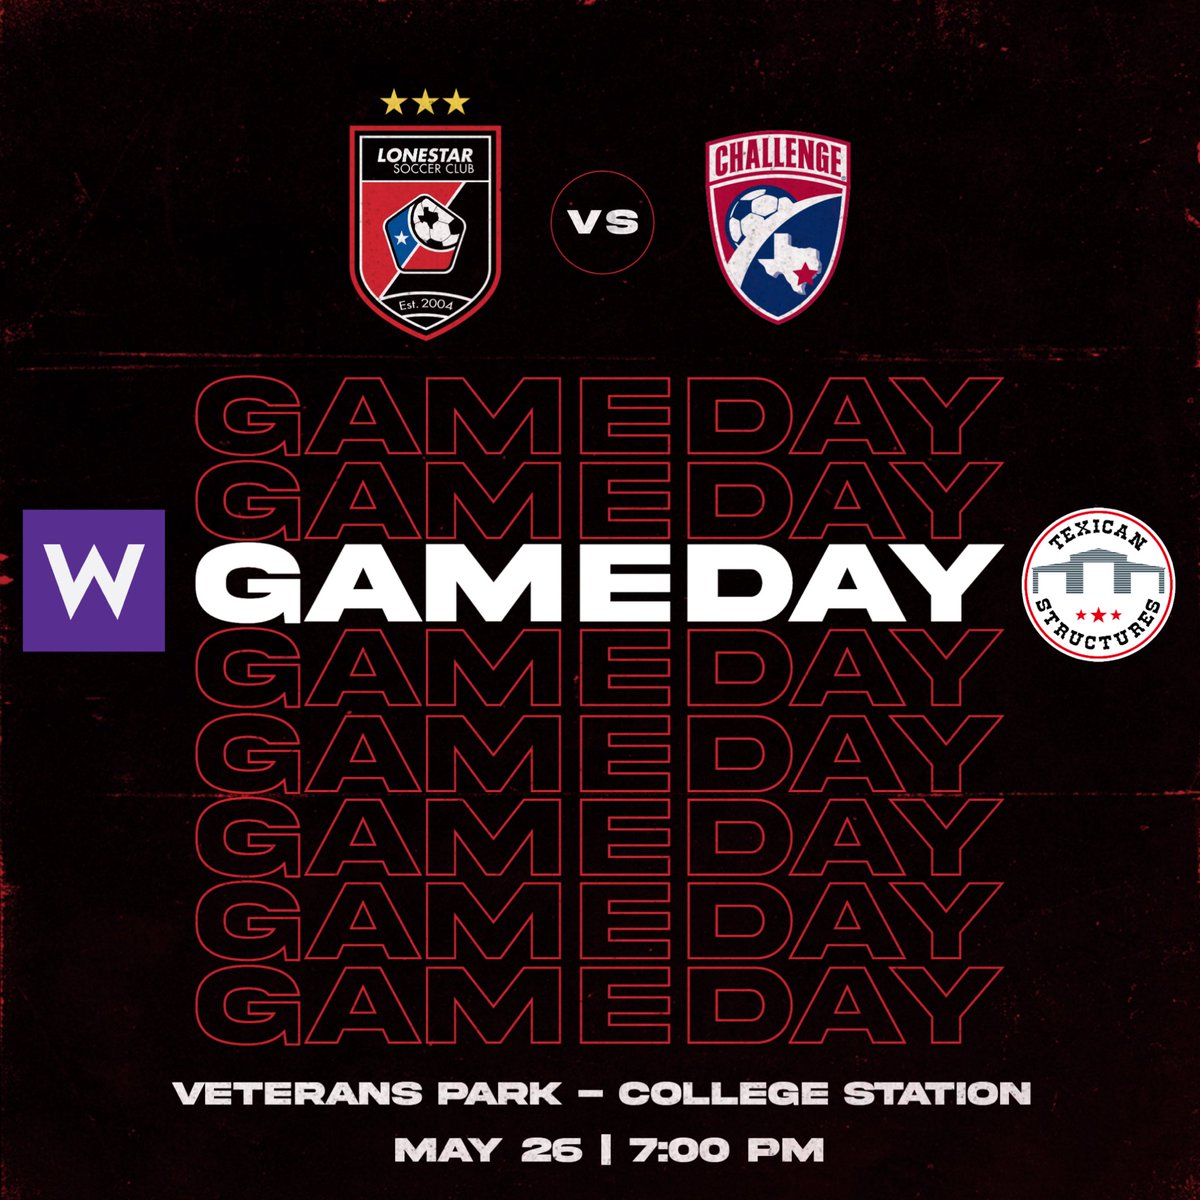 MEMORIAL DAY WEEKEND AWAY MATCHDAY vs Challenge SC at Veterans Park & Athletic Complex in College Station #WeAreLonestar | #ForTheW